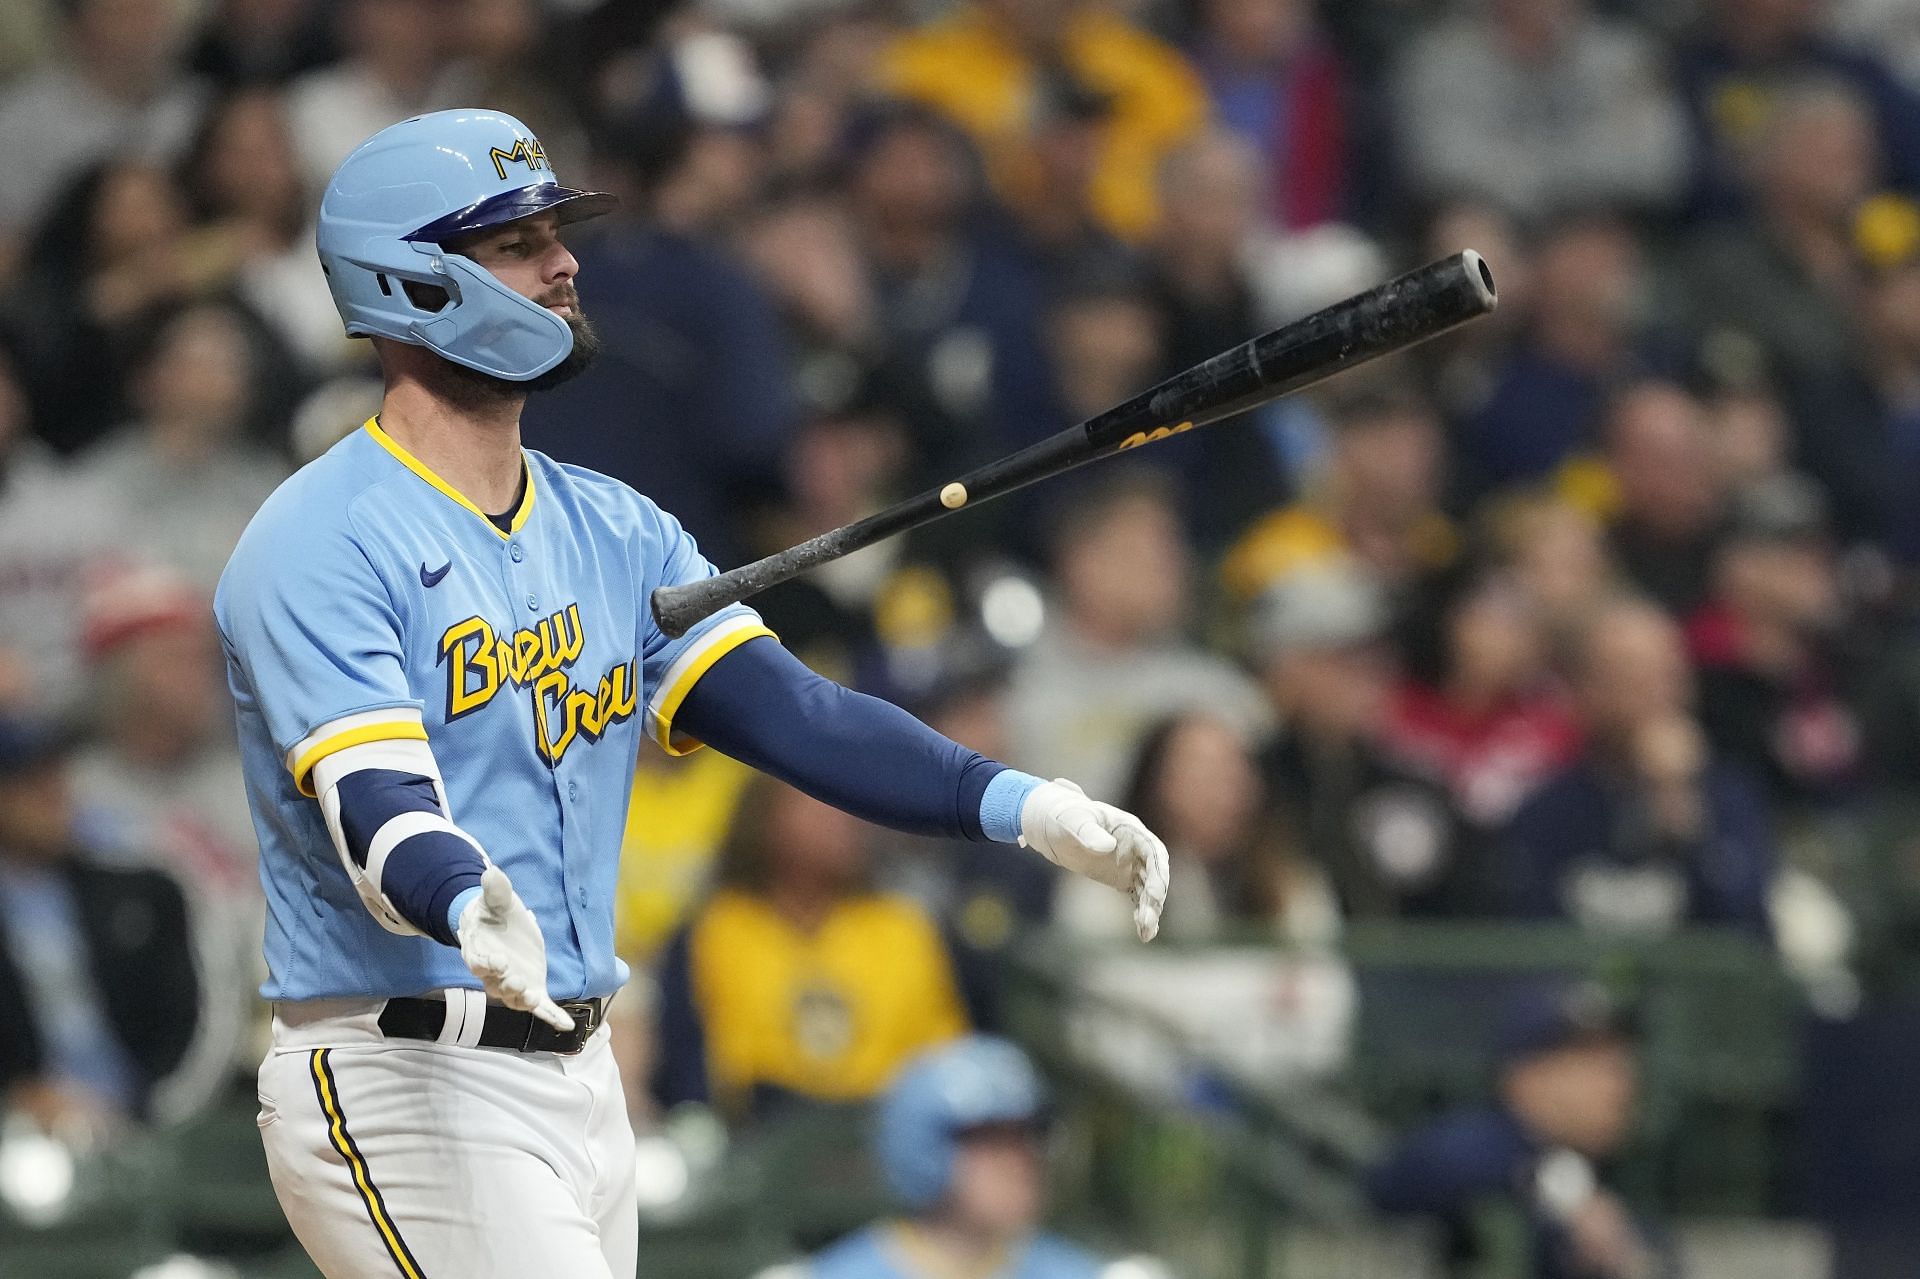 Should the Red Sox trade for Jesse Winker this offseason? - Over